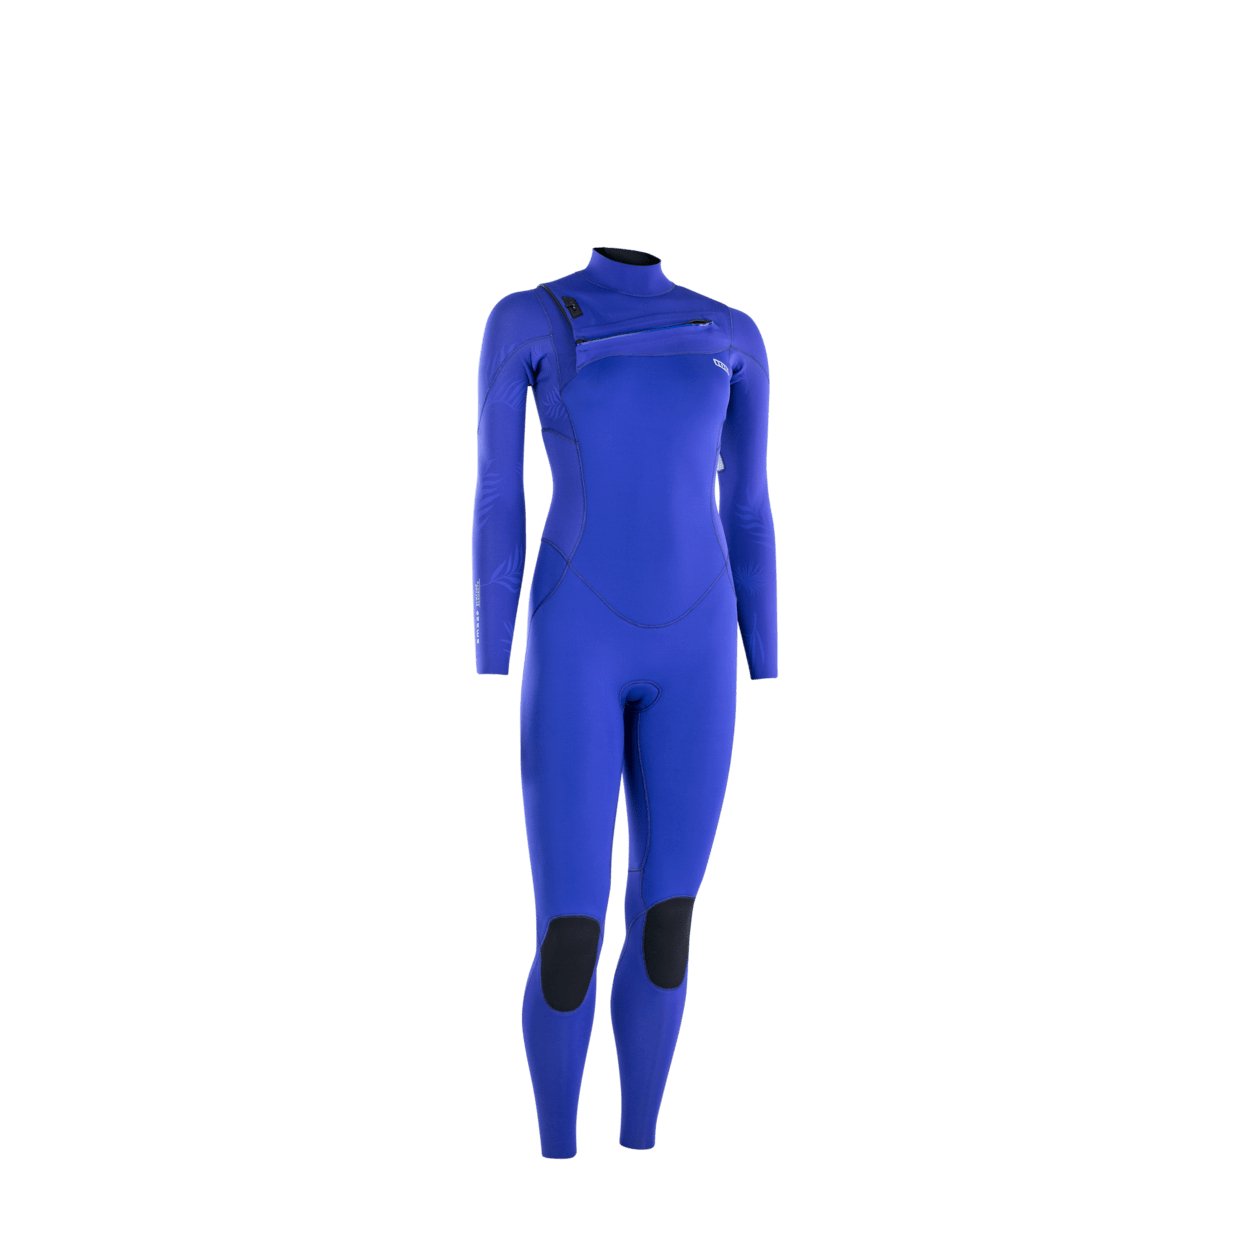 ION Amaze Core 4/3 Front Zip 2022 - Worthing Watersports - 9010583058061 - Wetsuits - ION Water